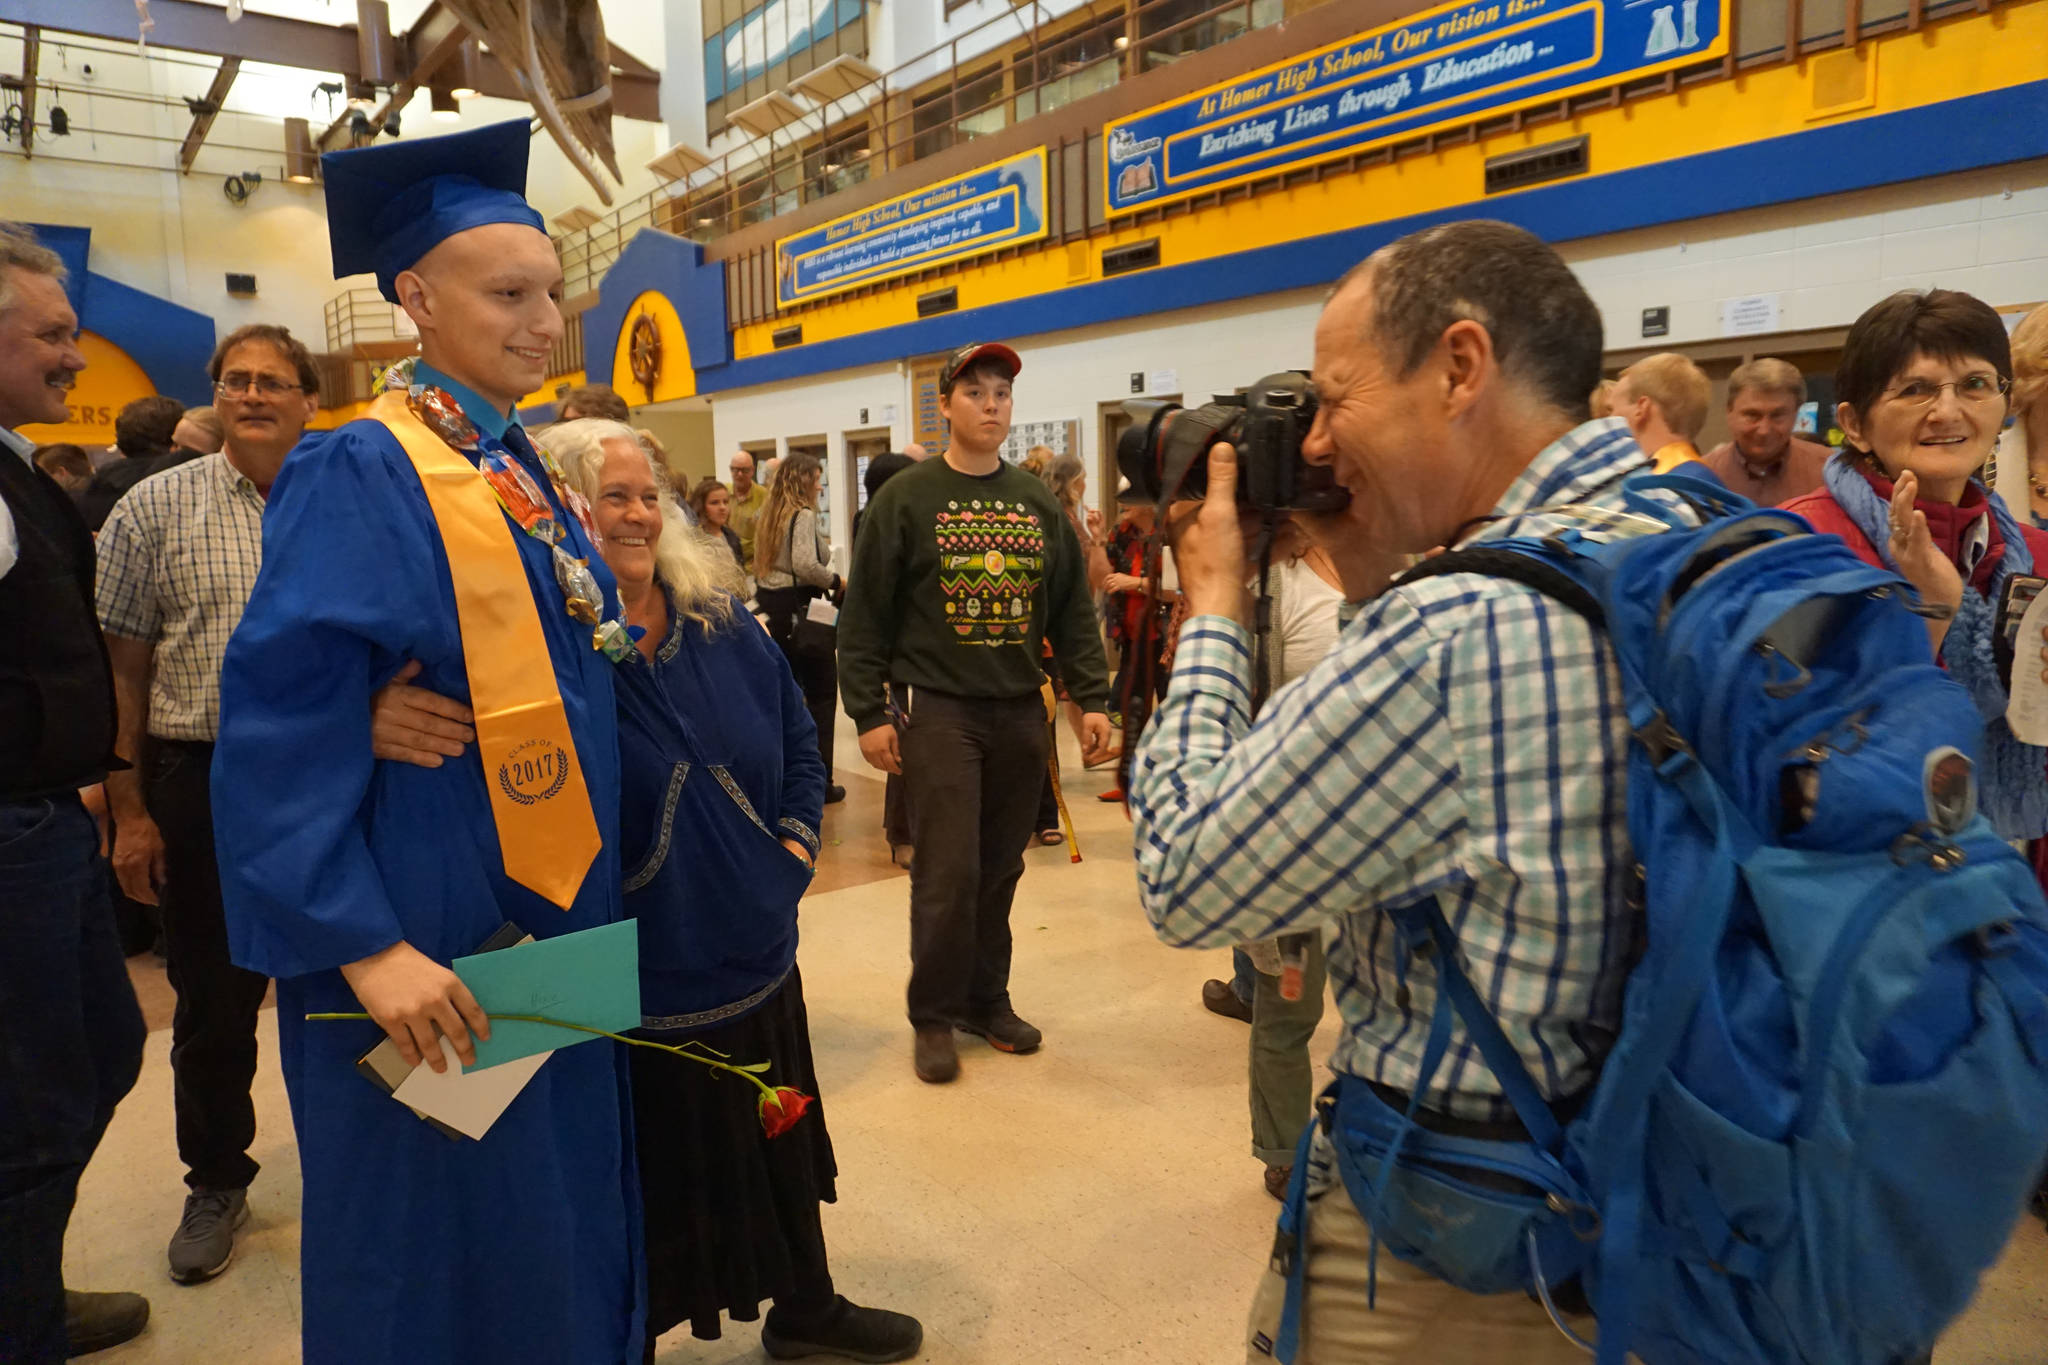 Commencement shows hope, community support